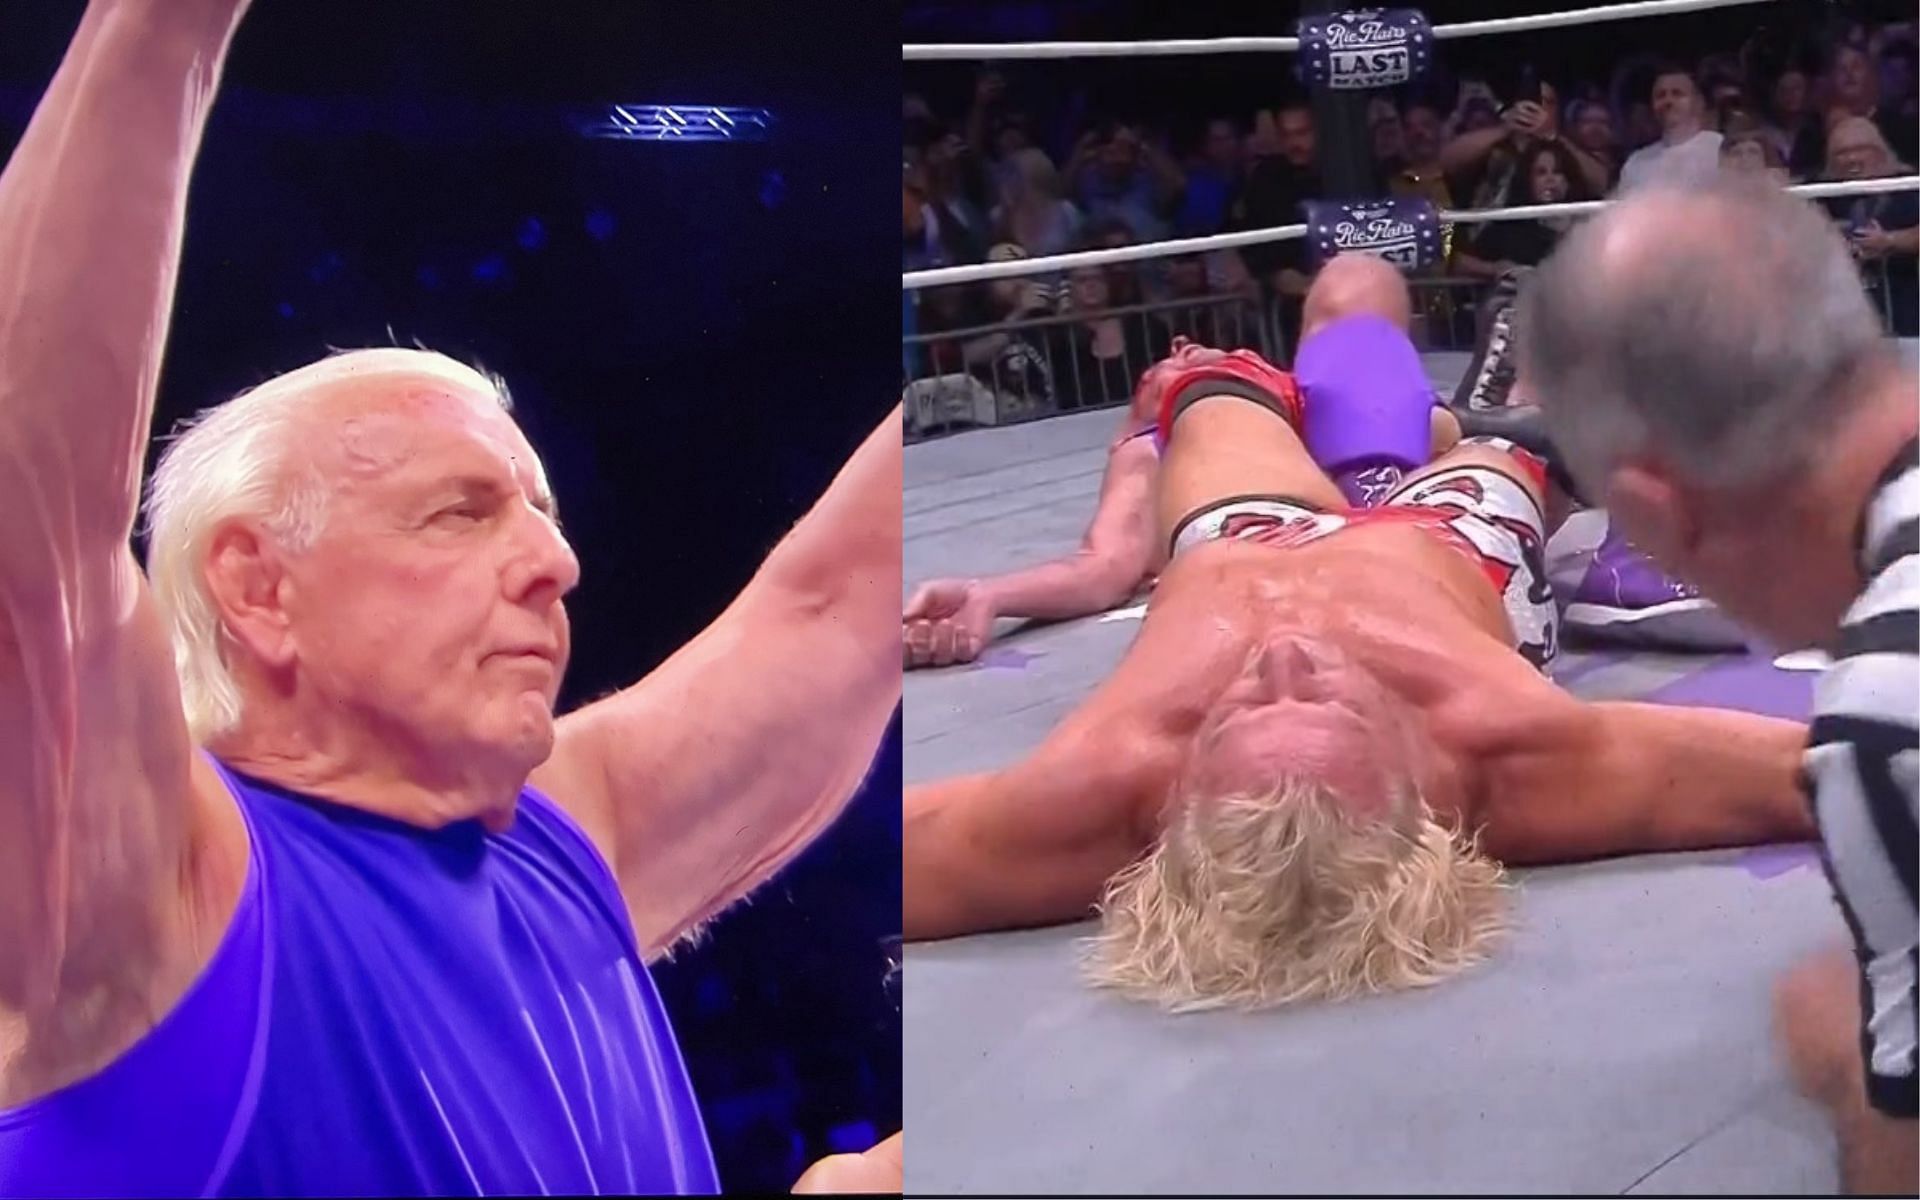 Ric Flair was left tired and bloodied but happy after his final match